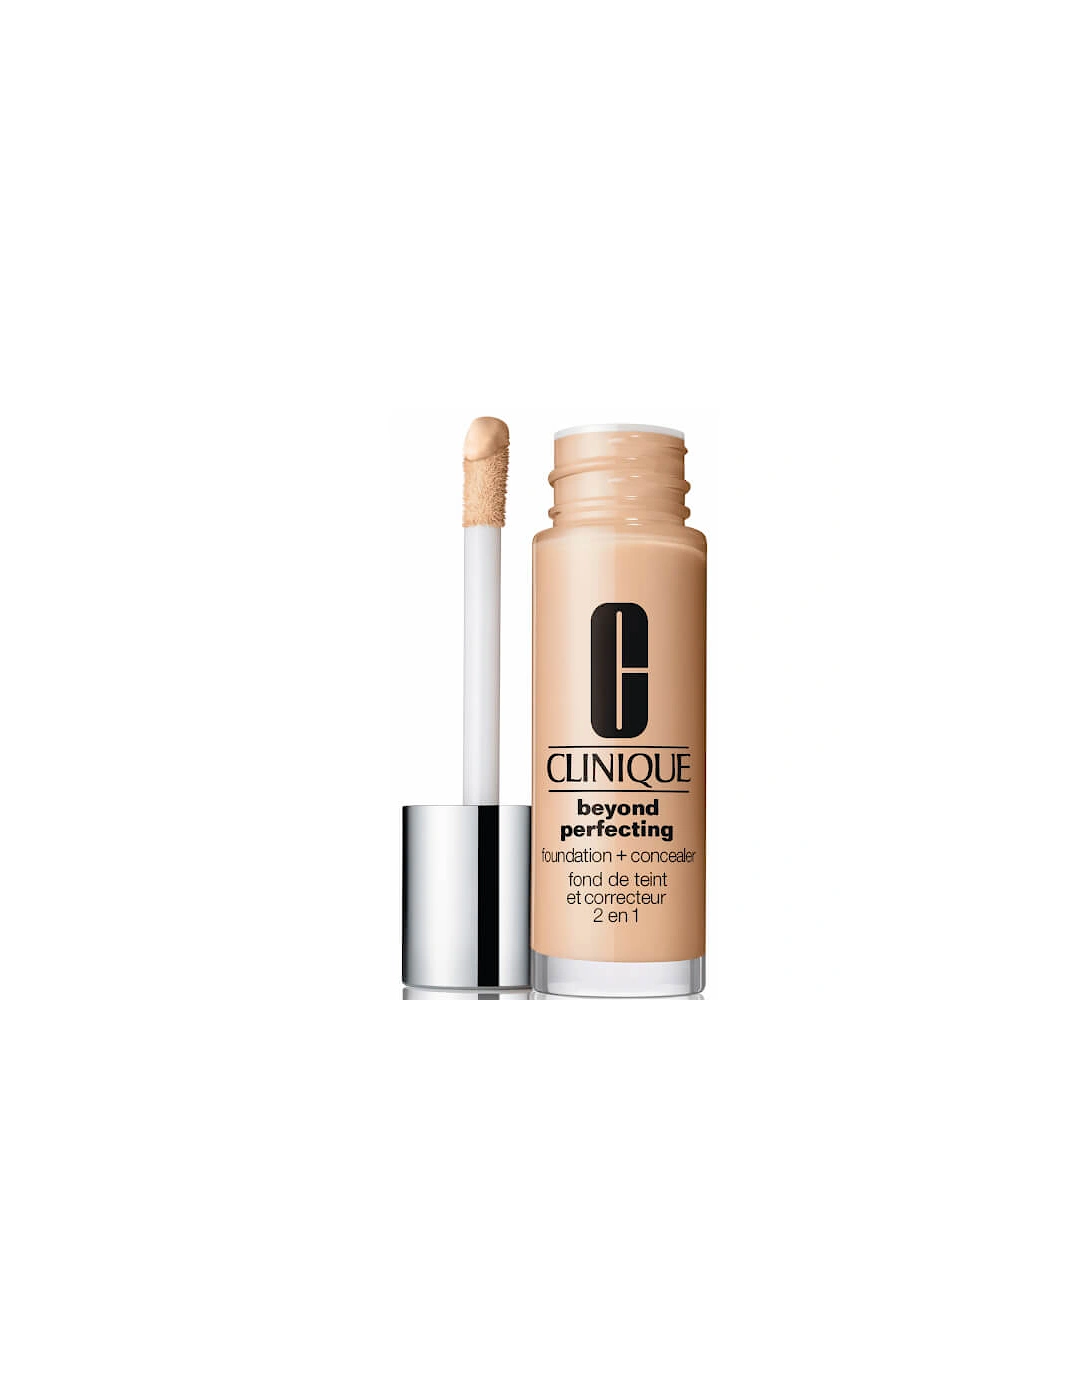 Beyond Perfecting Foundation and Concealer Cream Whip, 2 of 1